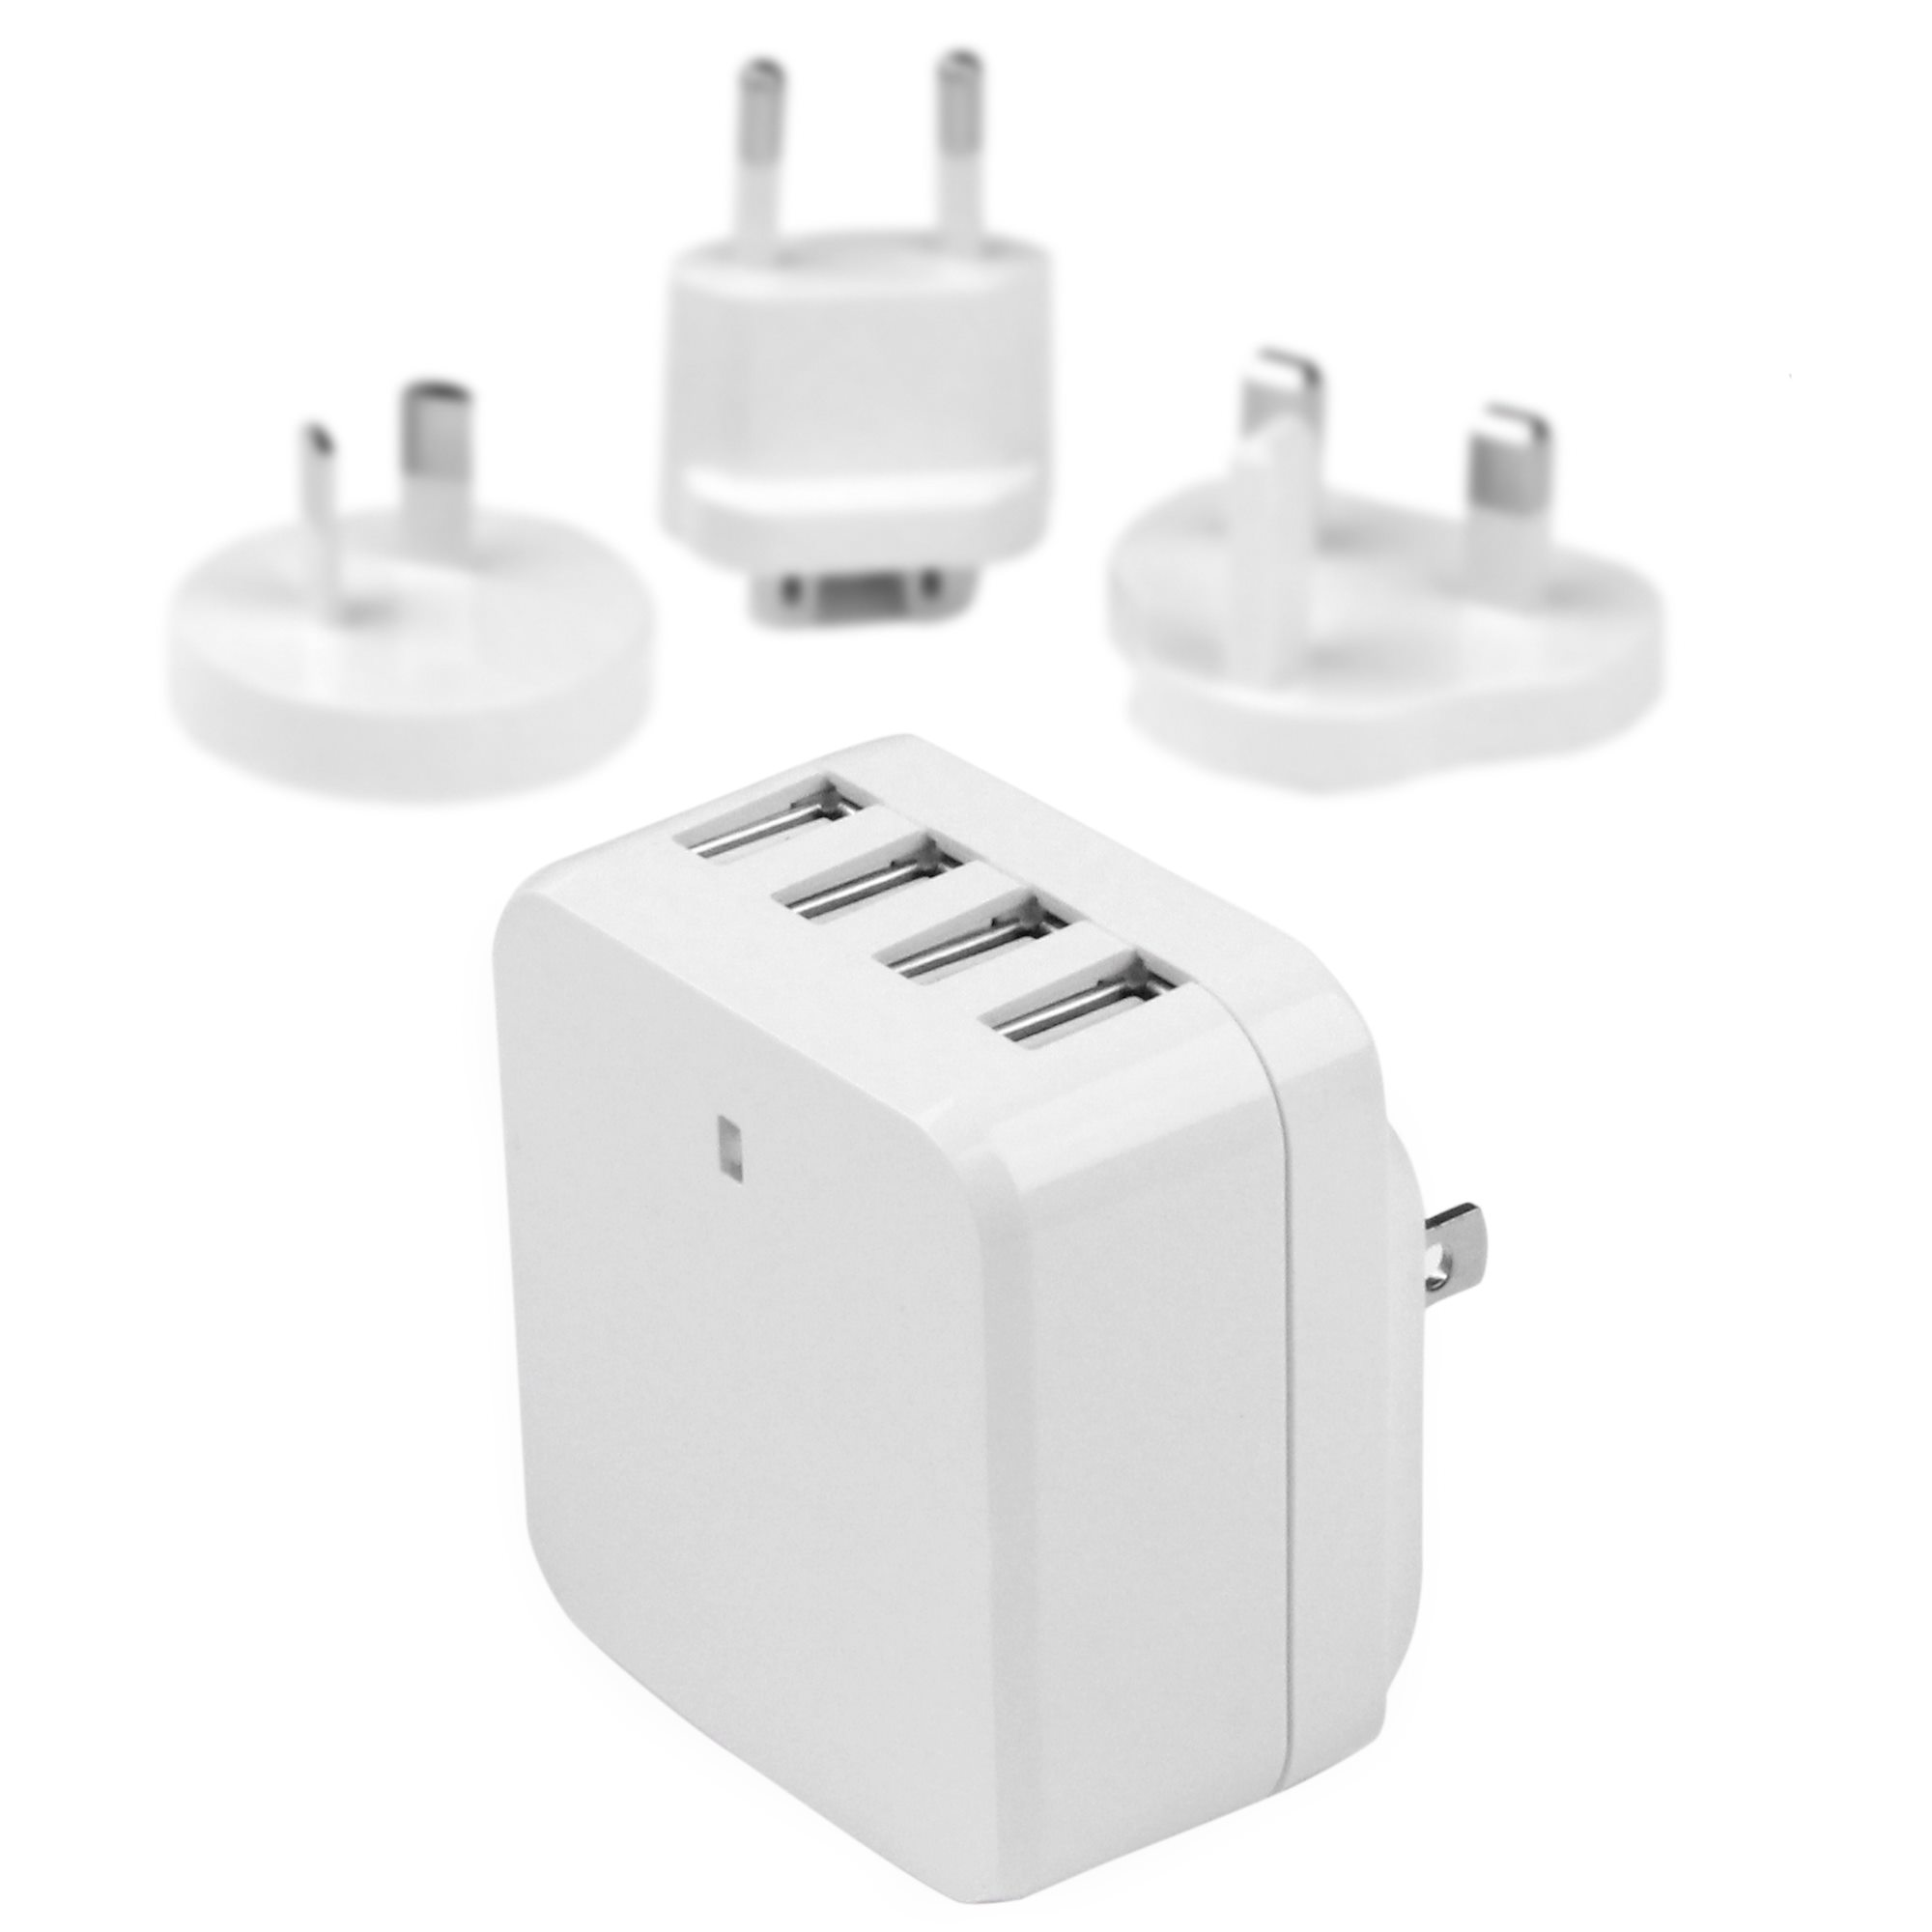 【USB4PACWH】4X USB WALL CHARGER 34W / 6.8A